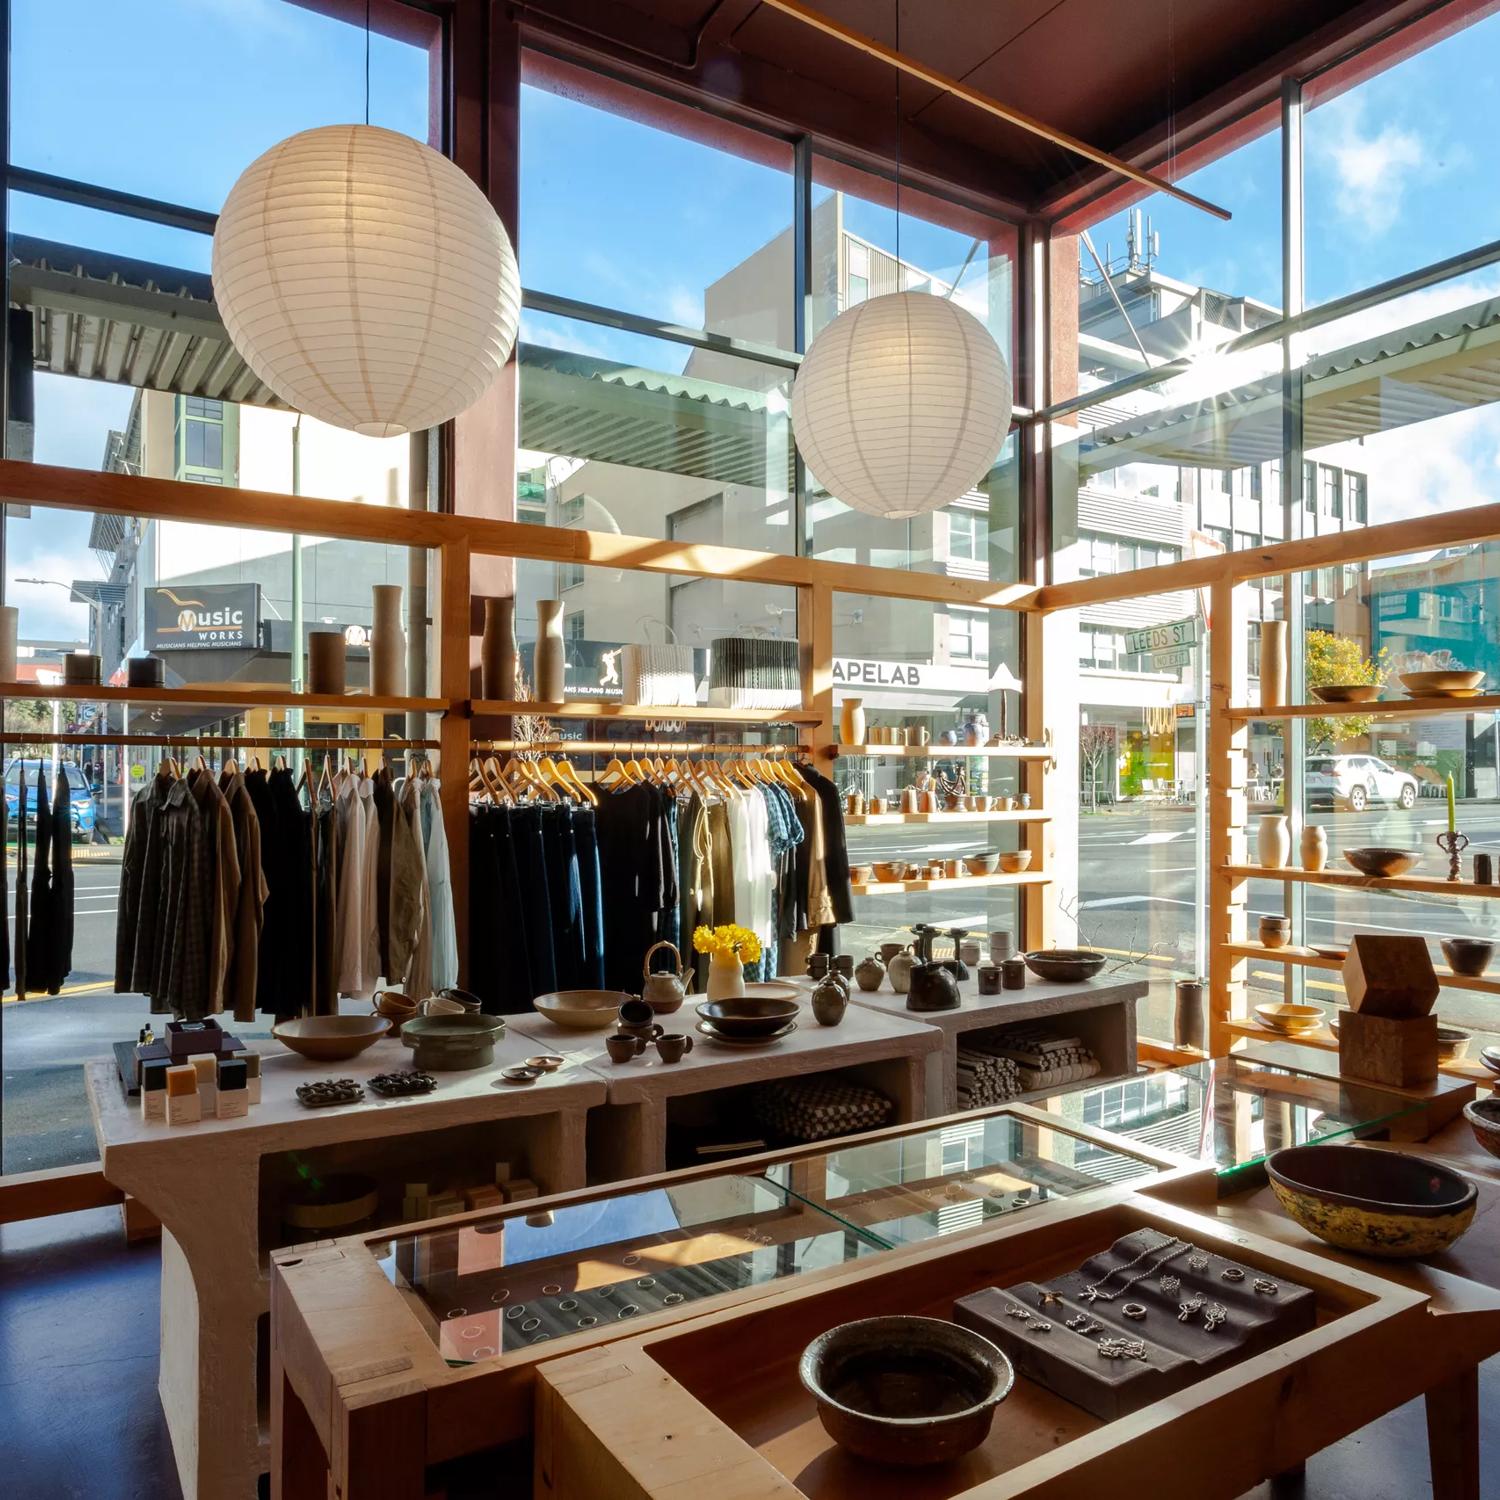 Inside Kaukau on ghuznee st, with large glass windows, clothes racks and wooden display tables.